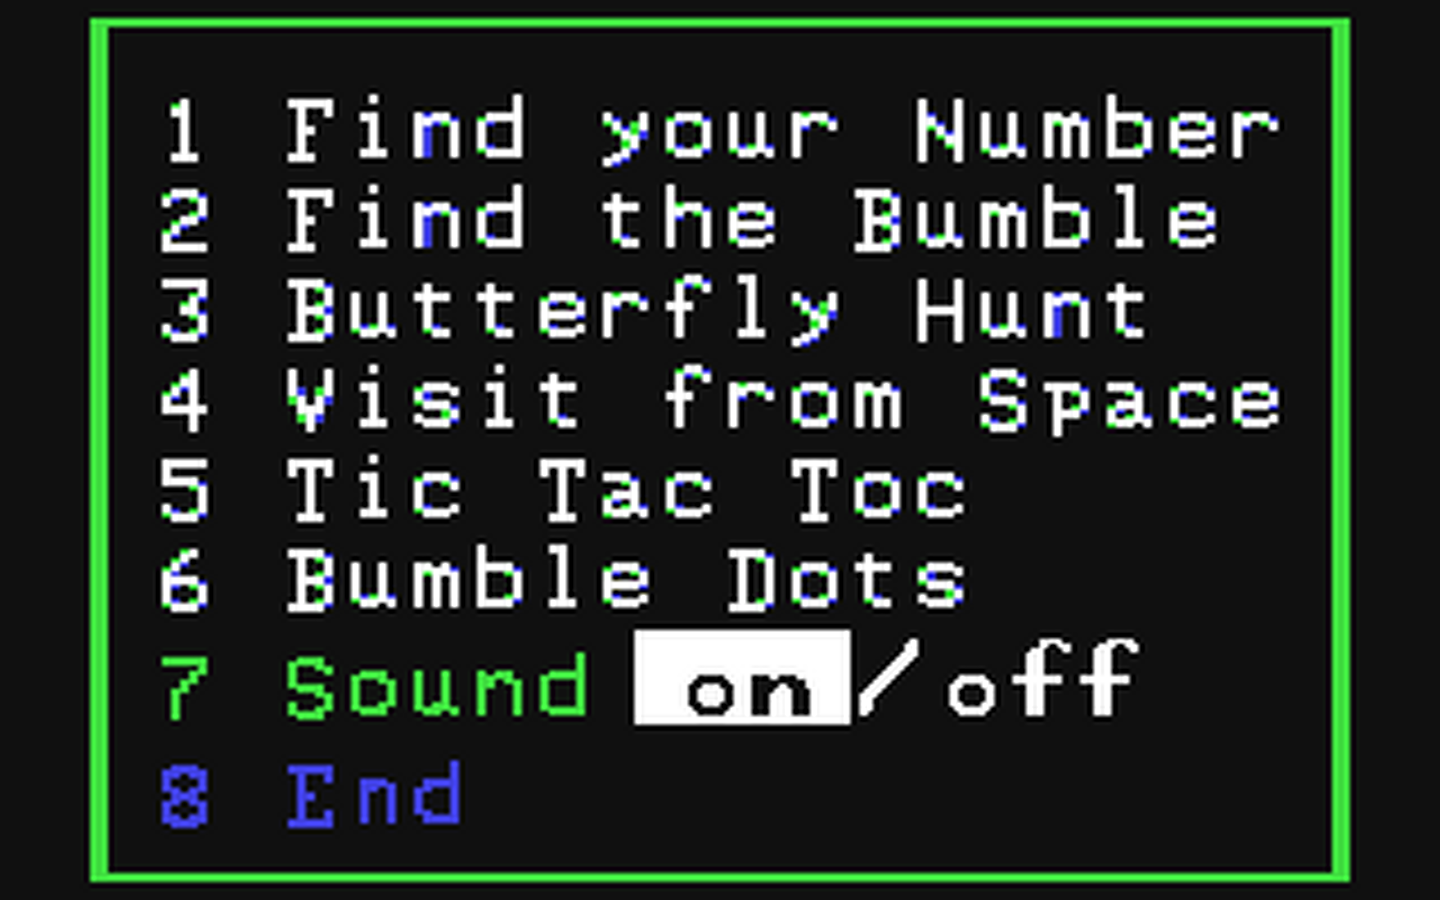 C64 GameBase Bumble_Games The_Learning_Company 1984